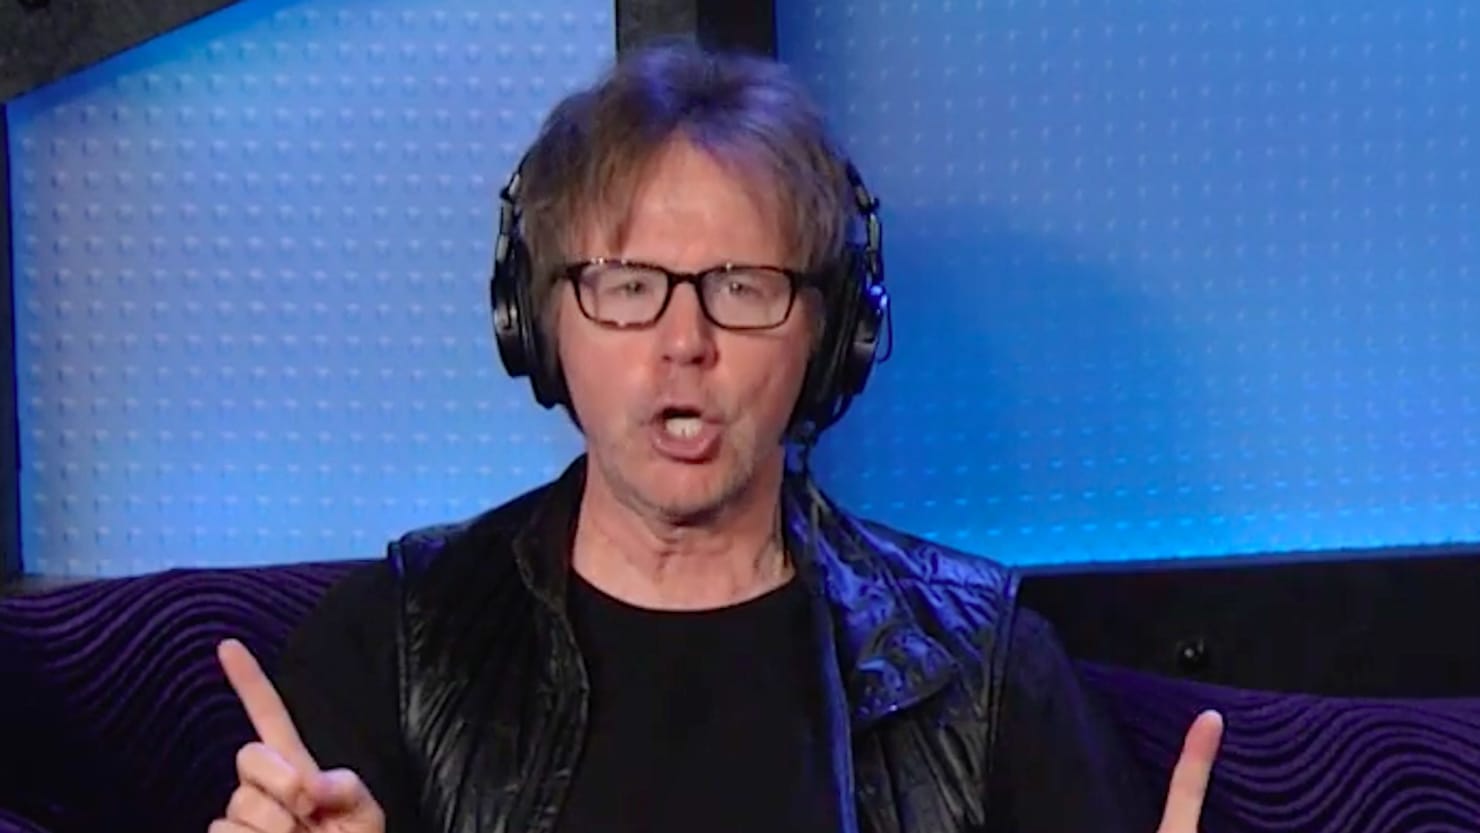 Dana Carvey Does 17 Celebrity MicroImpressions in 2 Minutes